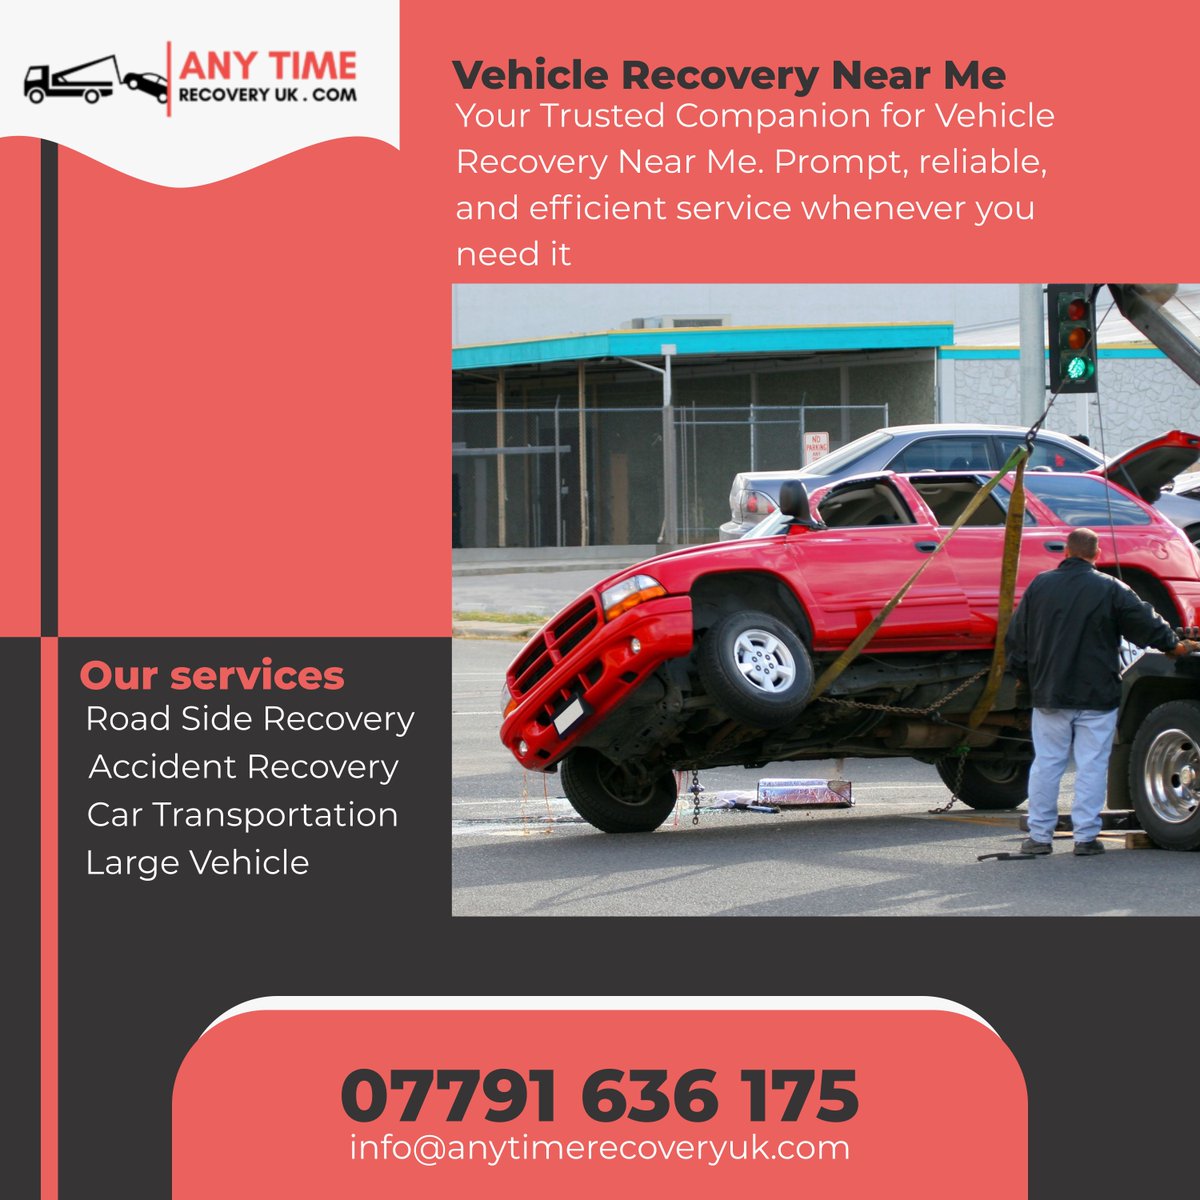 Your go-to vehicle recovery service across the United Kingdom. We're here 24/7 to provide prompt and reliable assistance when you need it most.

anytimerecoveryuk.com
#VehicleRecovery
#RoadsideAssistance
#TowTruckService
#EmergencyRecovery
#AutoRescue